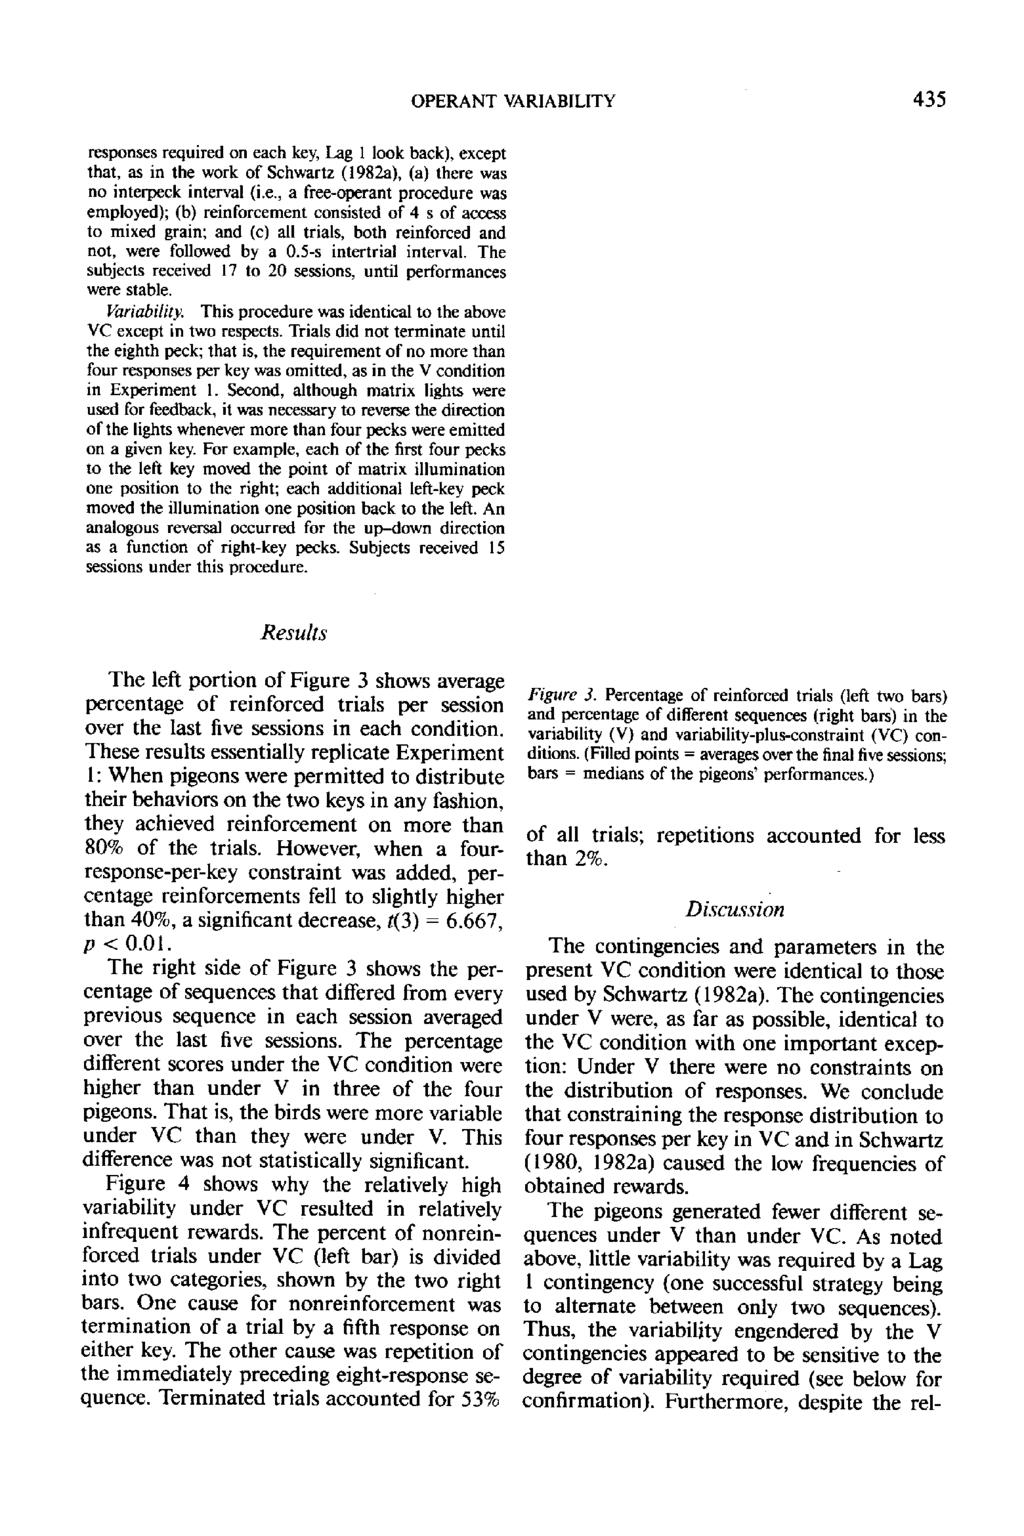 responses required on each key, Lag 1 look back), except that, as in the work of Schwartz (1982a), (a) there was no interpeck interval (i.e., a free-operant procedure was employed); (b) reinforcement consisted of 4 s of access to mixed grain; and (c) all trials, both reinforced and not, were followed by a 0.